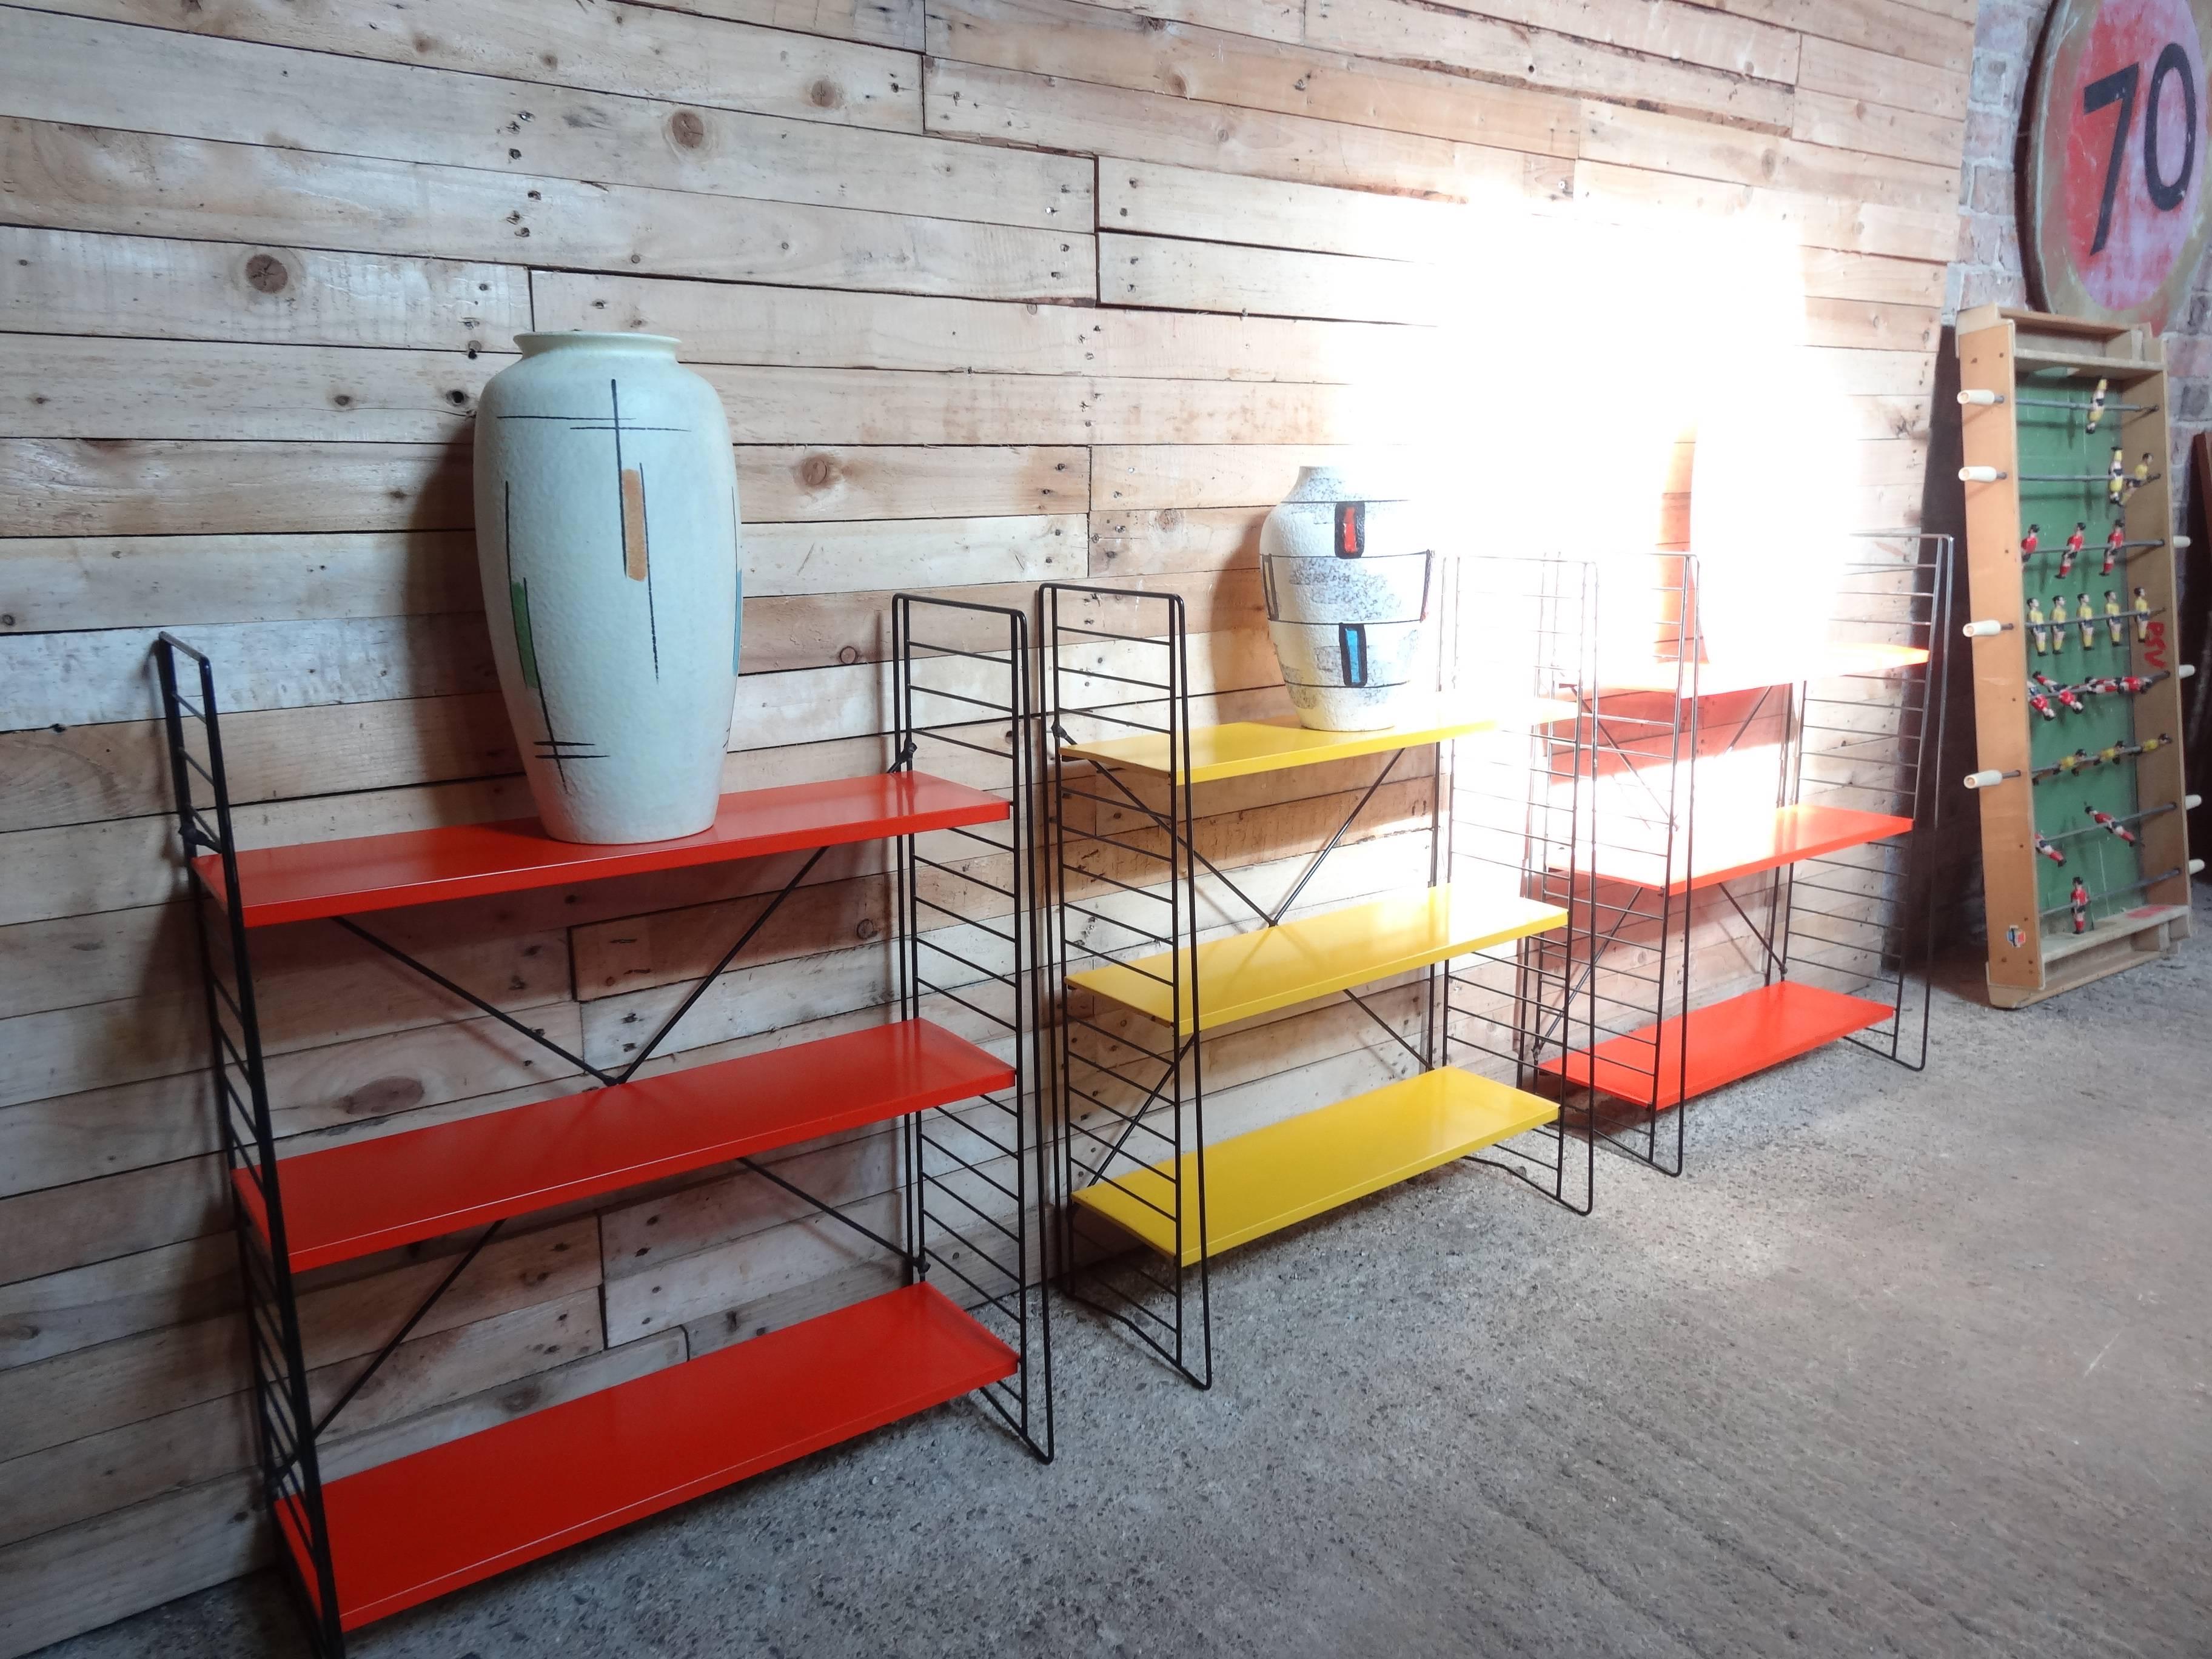 Sought after freestanding three Tomado rack (two orange/red and one yellow) in good vintage condition, price is per rack. A real rarity and very collectable. 

Measures: Height 85cm, depth 29cm, width 65cm, each.

 